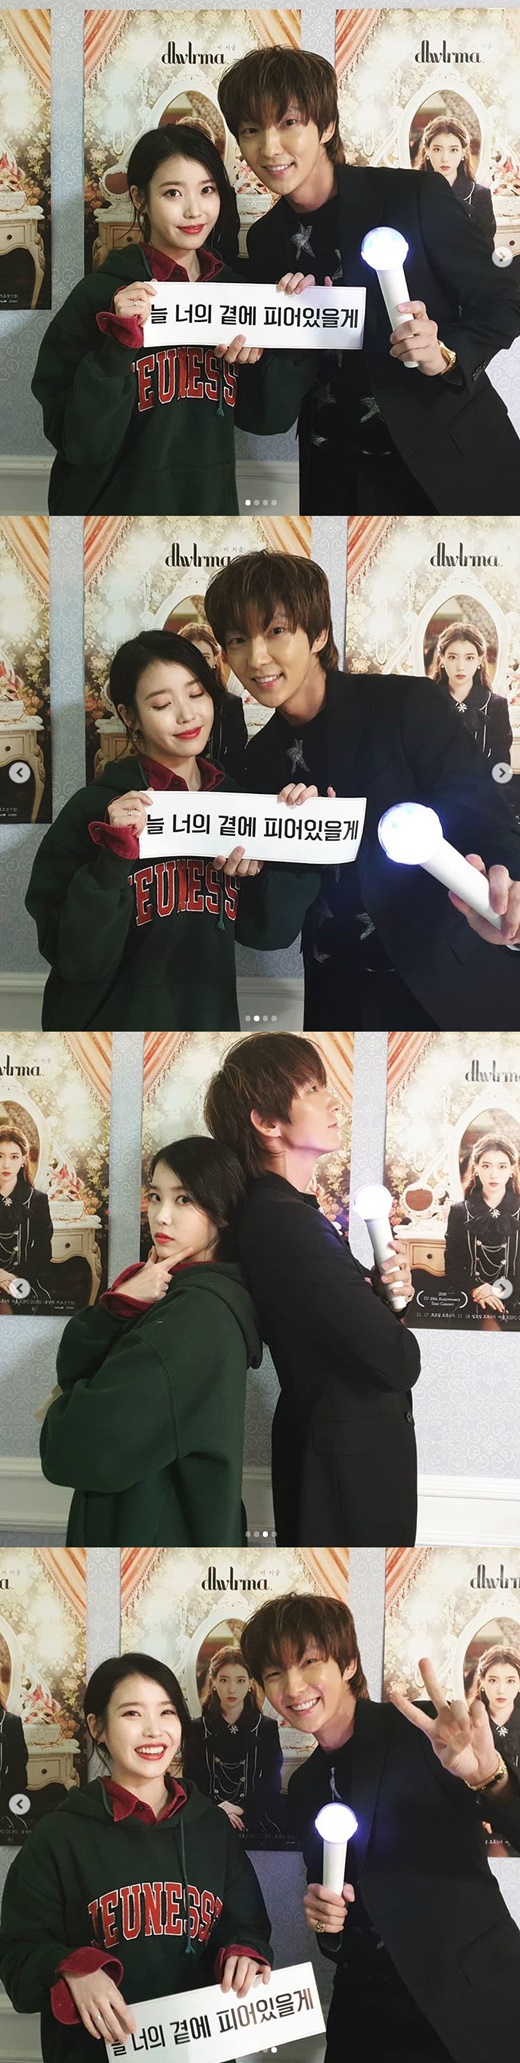 Actor Lee Joon-gi gave a Singer IU Concert comment.Lee Joon-gi said on his 18th day of the show, Its a great performance that has been over 5 hours and 30 minutes.I did not know that it was time to enjoy the performances that made me think about how hard the best staff and the best artist prepared. Lee Joon-gi in the public photos took various poses with IU. The friendship of the two people who worked together on SBS Lovers of the Moon - Bobo Sim Kyung Rye stands out.Lee Joon-gi said, Ten years can be a decade of greater meaning for someone. Artist who creates that value.And beautiful fans, he said. How long have you been tearing your tears than the performance? Thank you so much for inviting me to Gift. I feel so much this time and I am going to Actor. Thank you.Ji Eun-a, he said.On the other hand, IU opened the IU 10th anniversary tour concert <# dlwlrma> on the 17th.